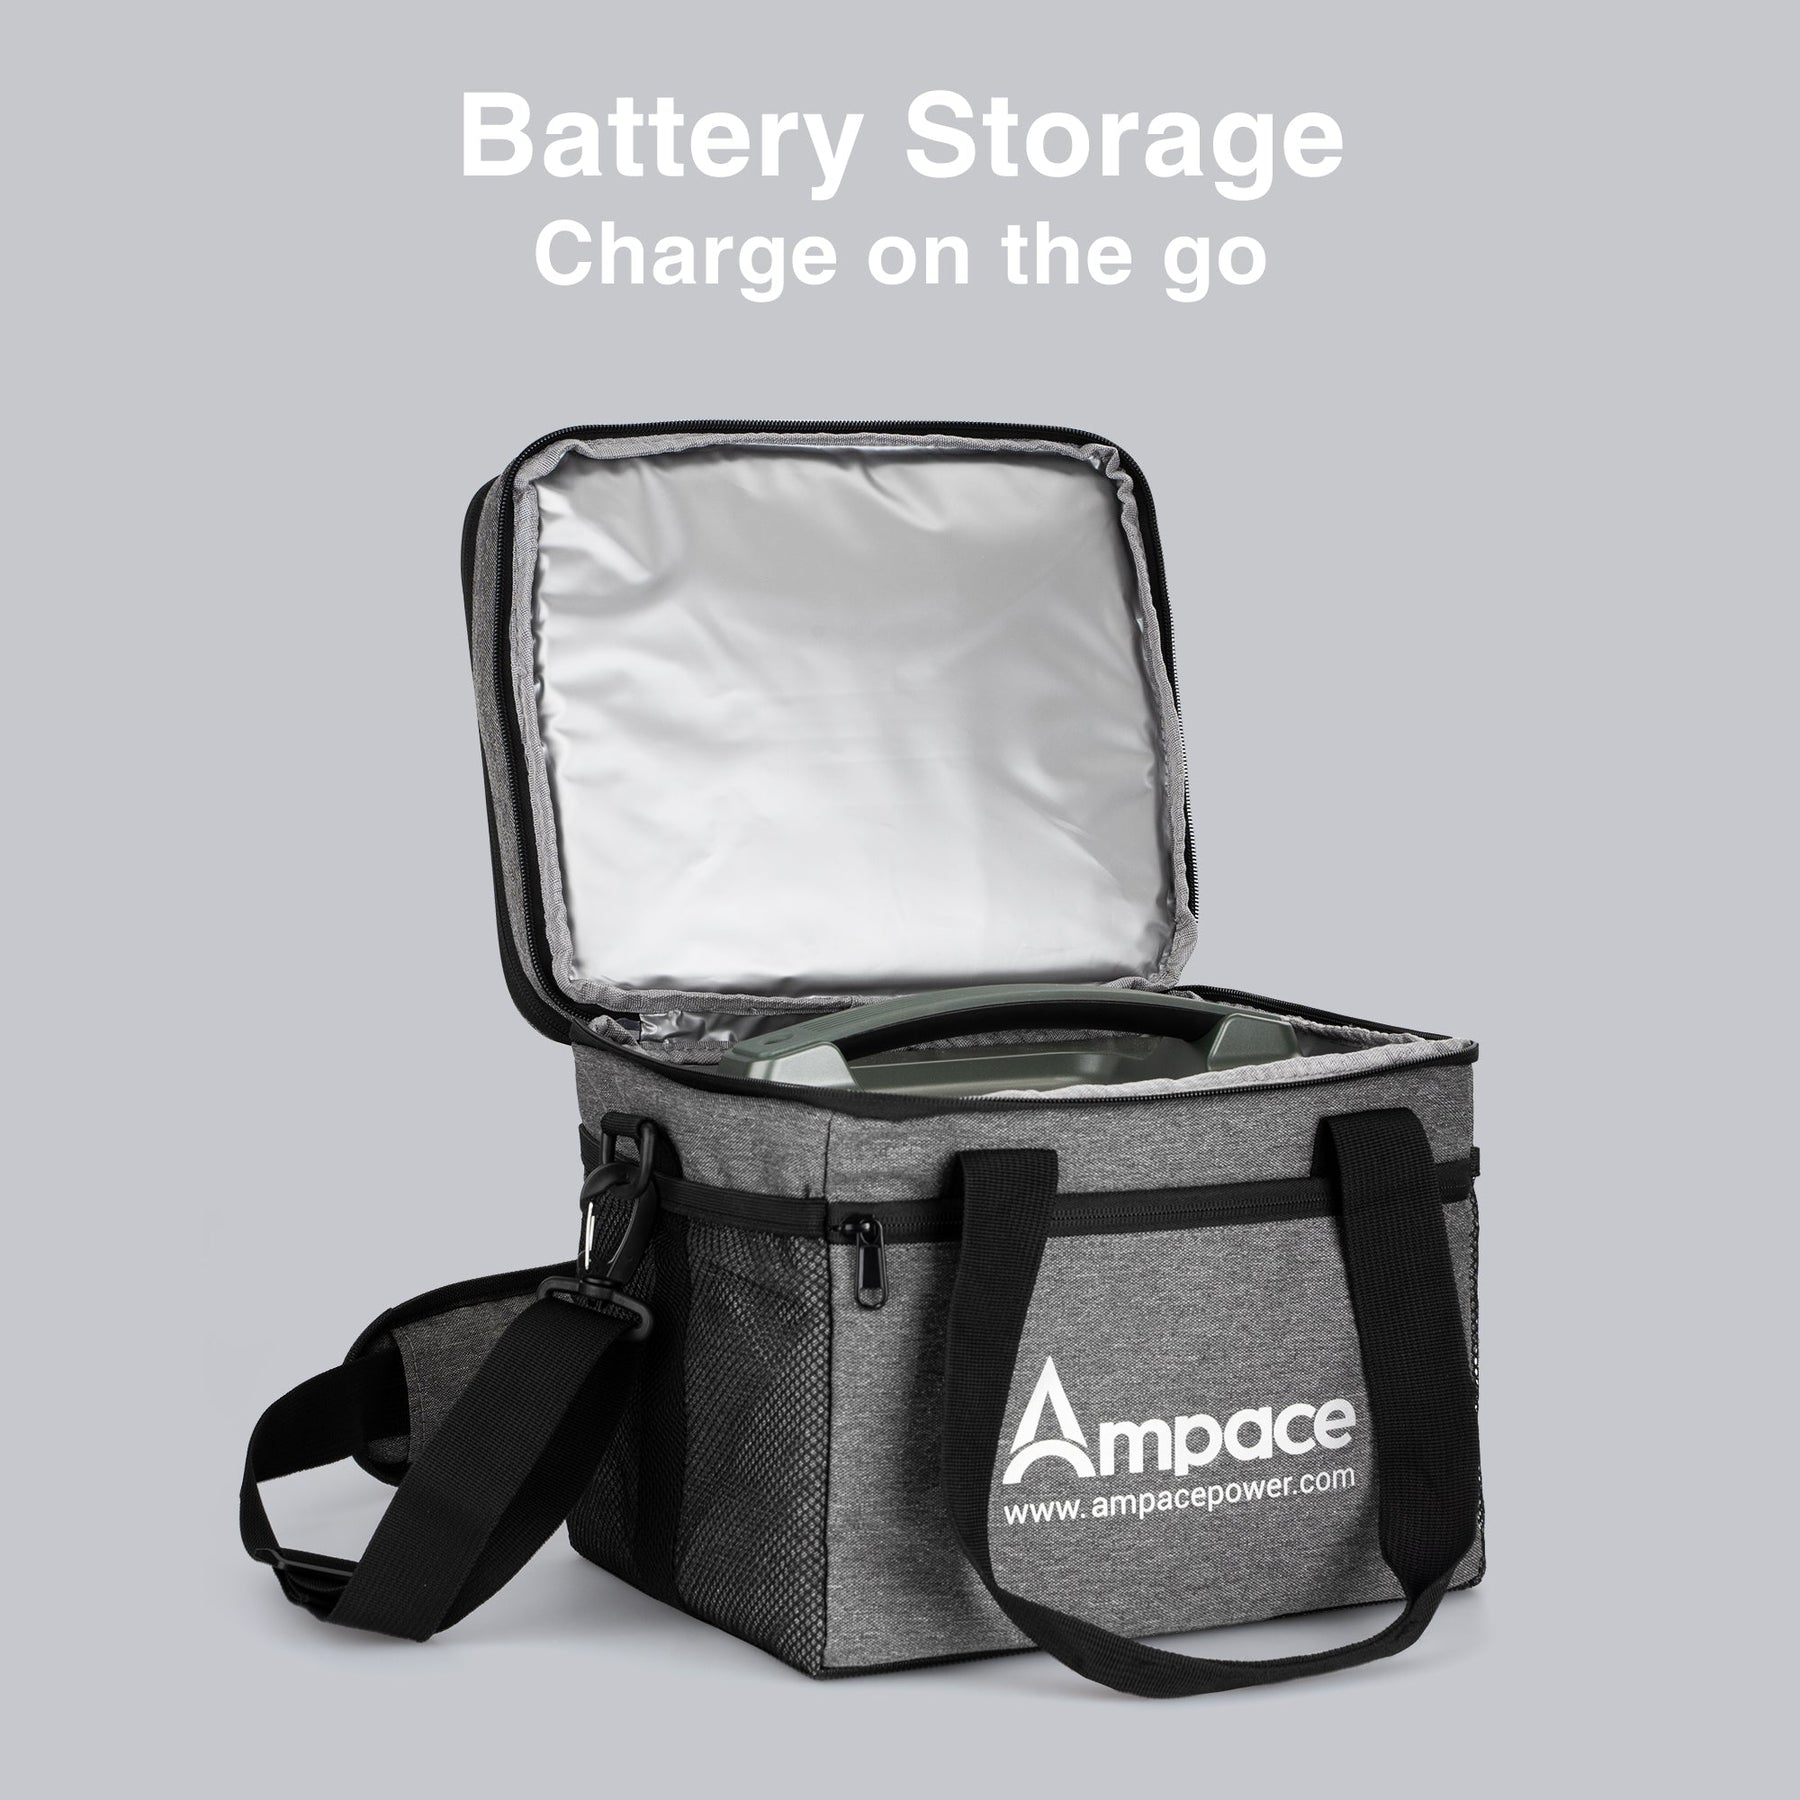 Ampace Carrying Case Bag for P600